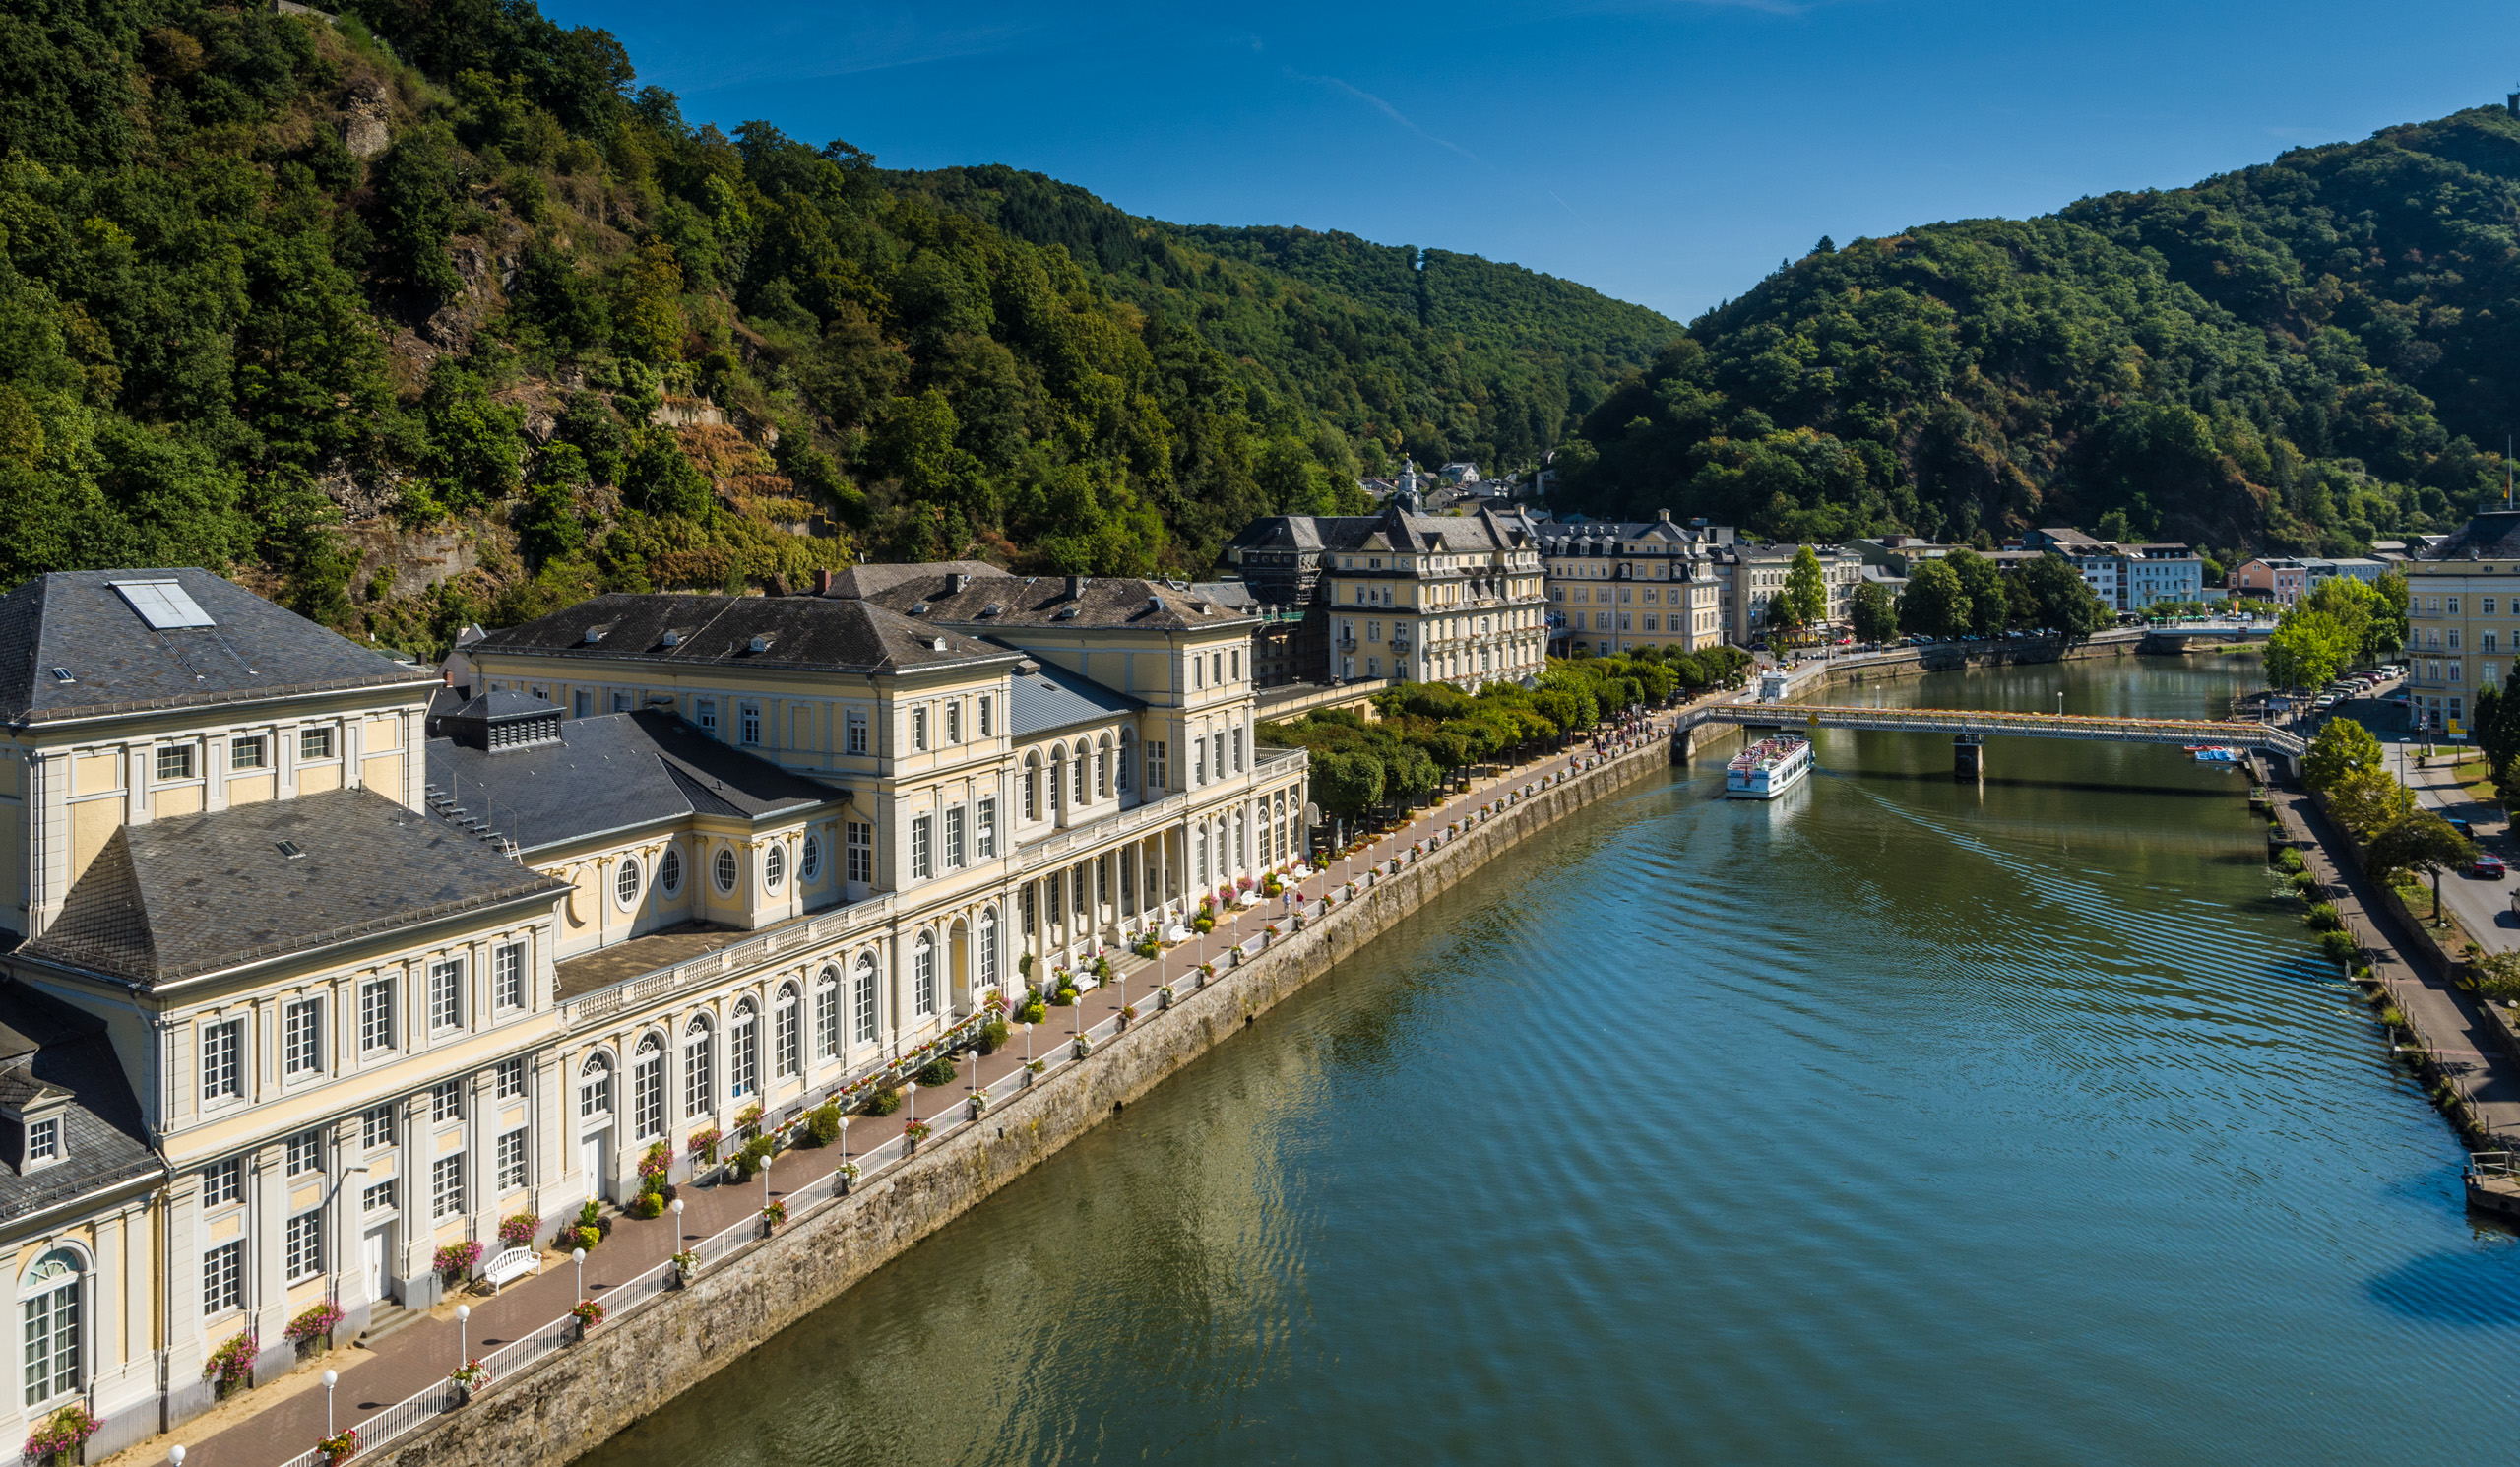 General View of Bad Ems on the River Lahn